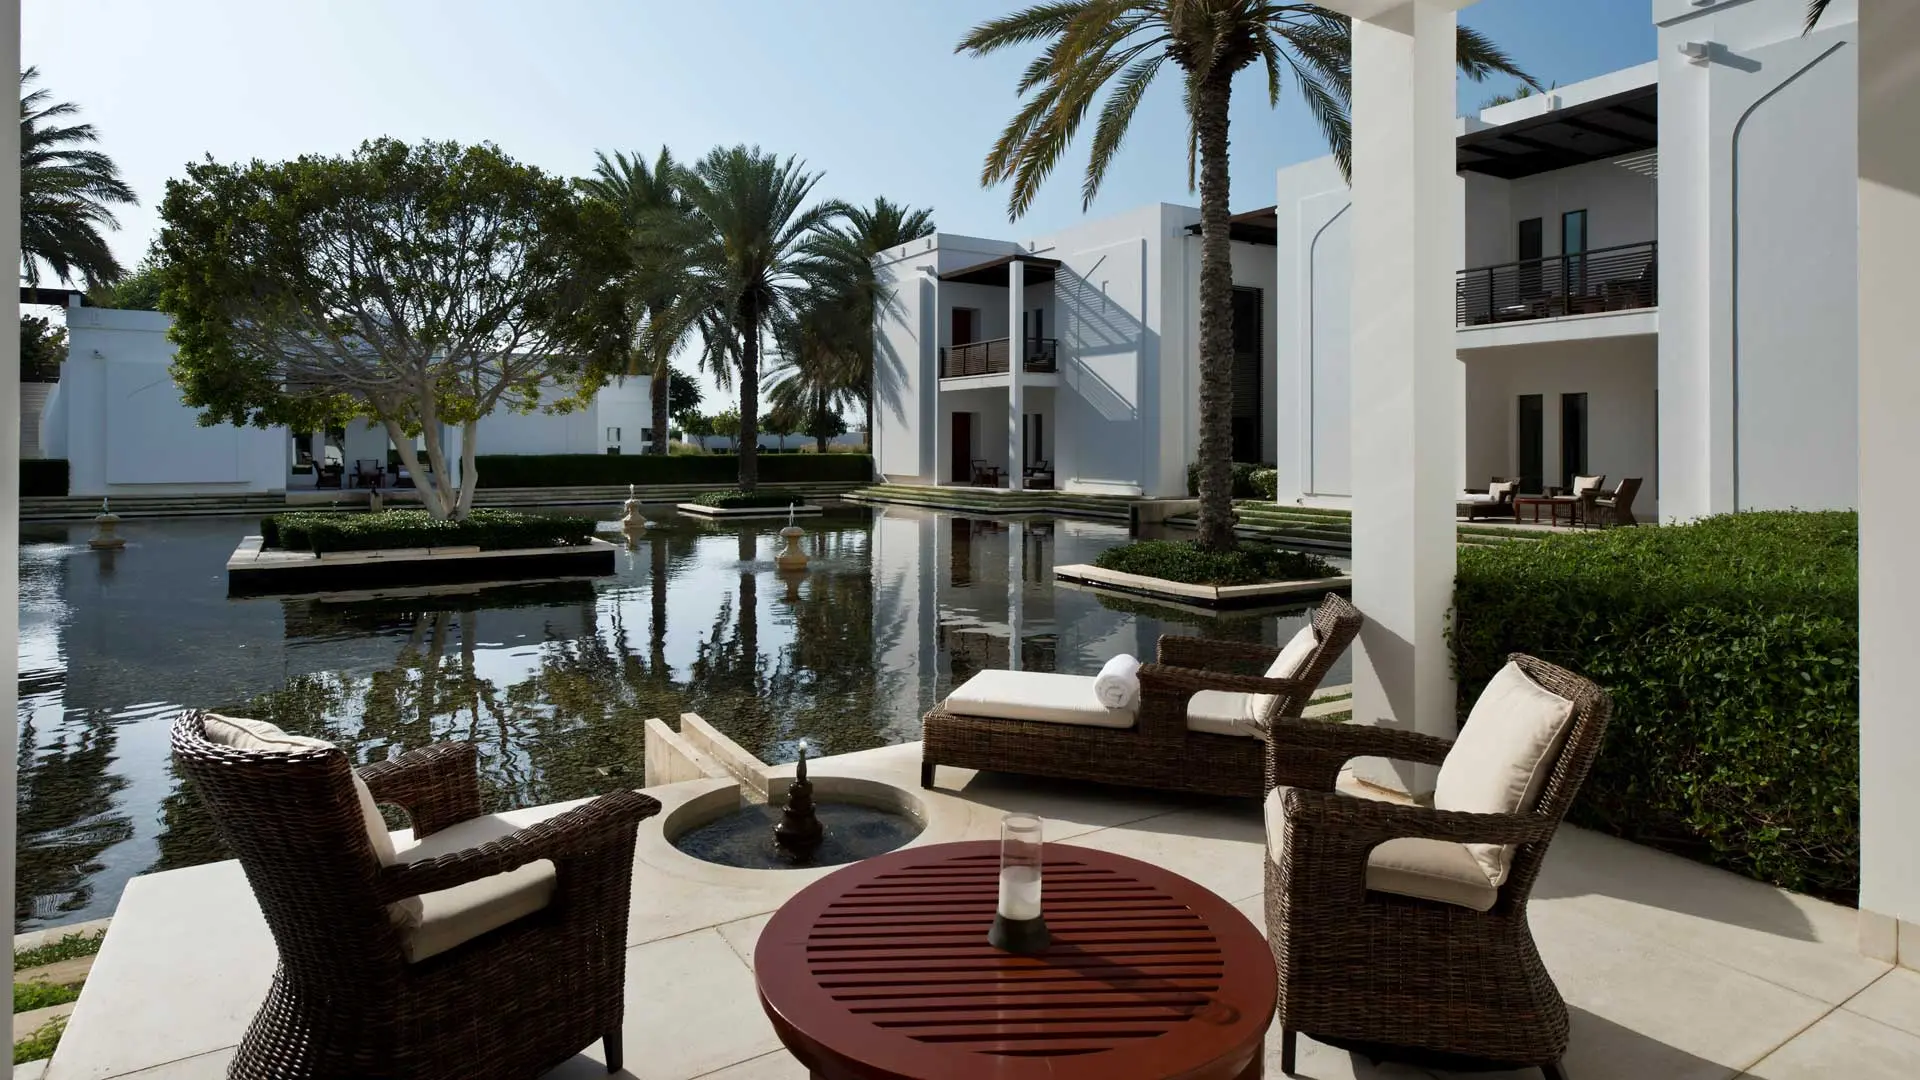 Hotel review Accommodation' - The Chedi Muscat - 5